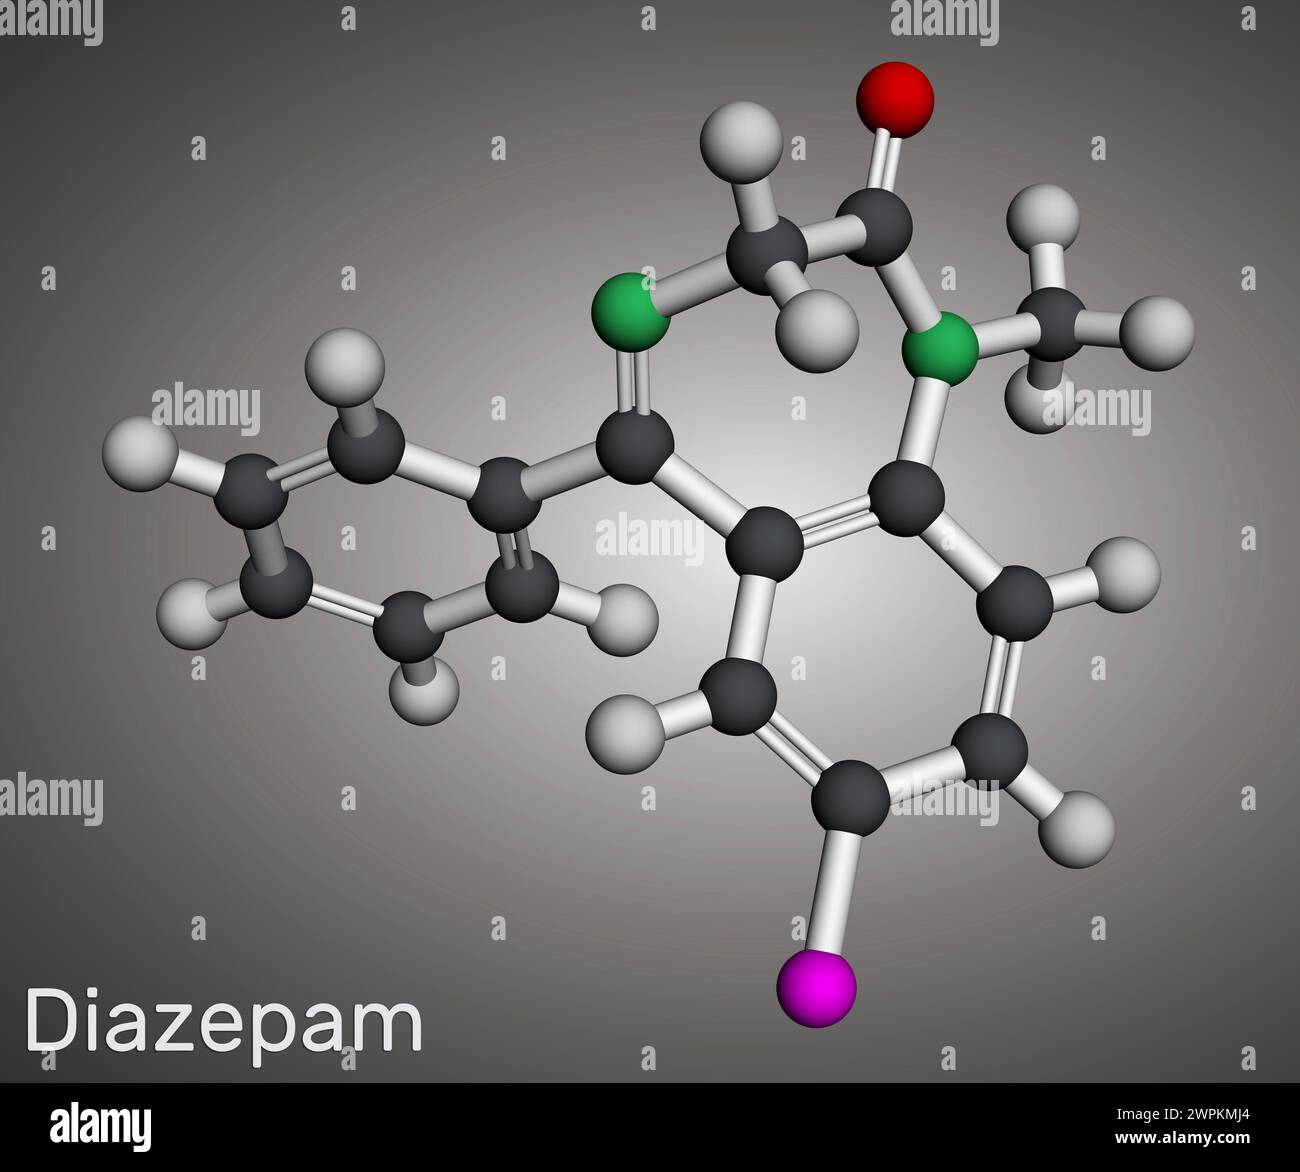 Diazepam drug molecule. It is long-acting benzodiazepine, used to treat panic disorders. Molecular model. 3D rendering. Illustration Stock Photo